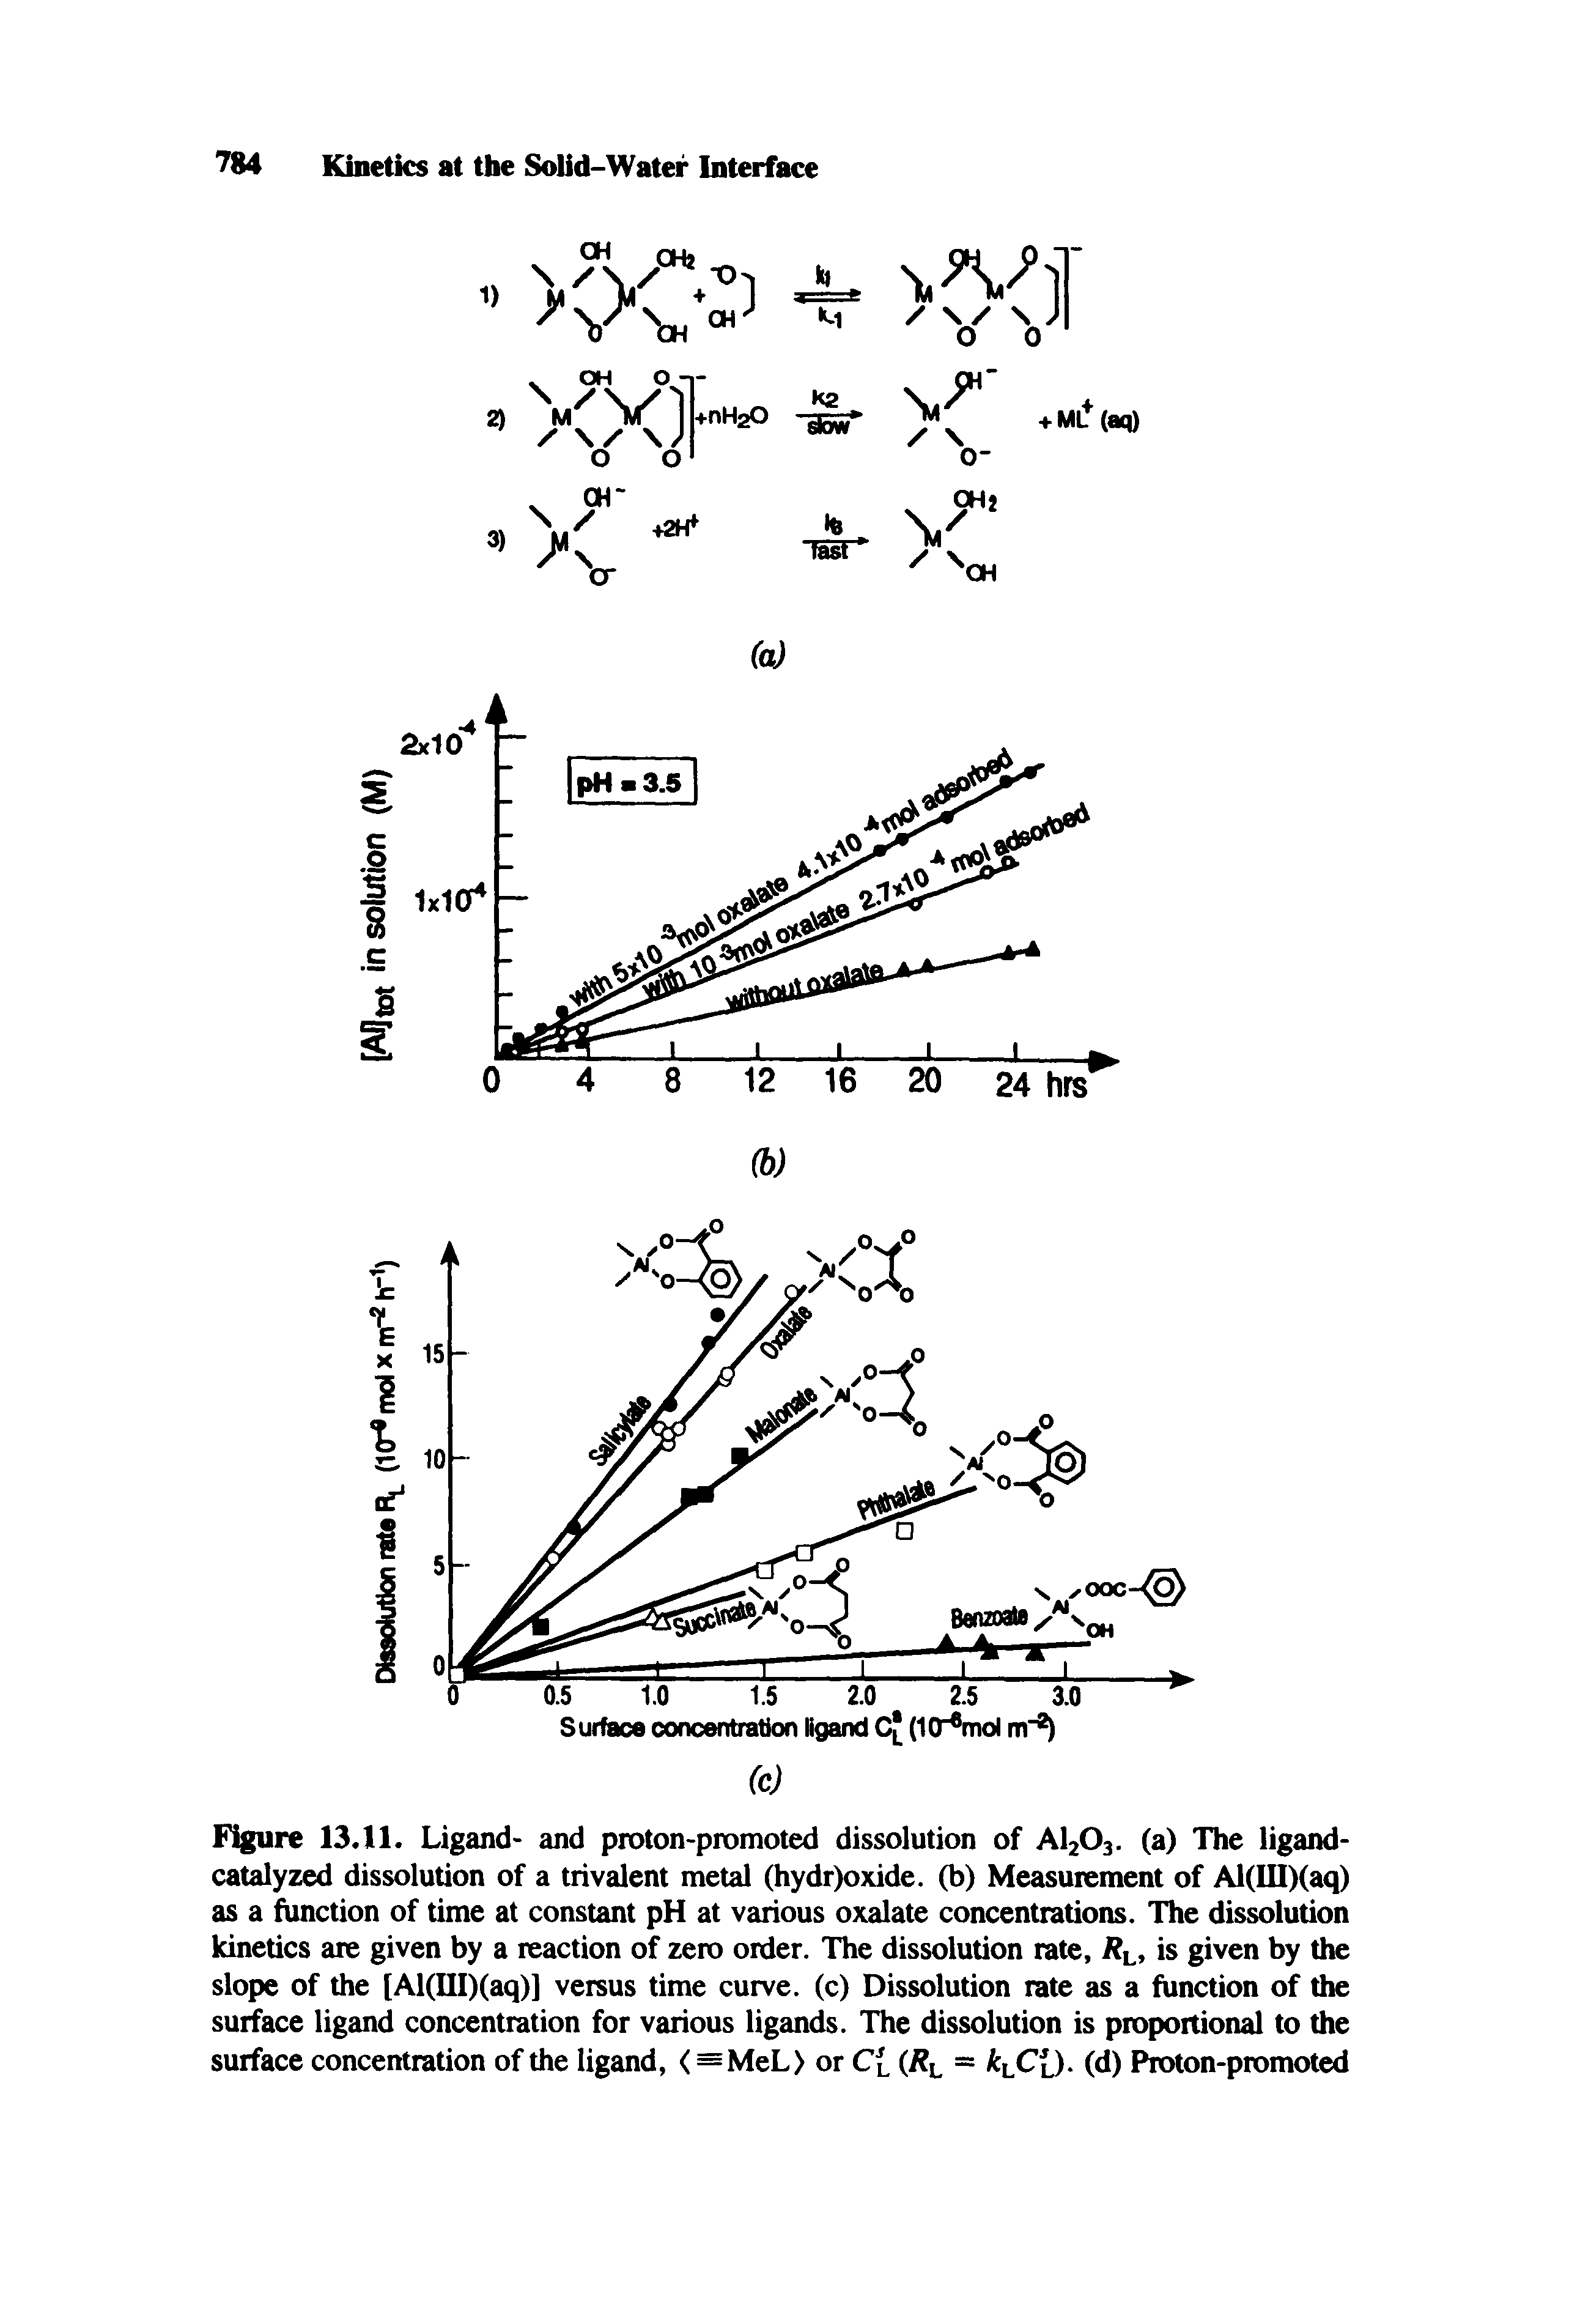 Figure 13.11. Ligand- and proton-promoted dissolution of AI2O3. (a) The ligand-catalyzed dissolution of a trivalent metal (hydr)oxide. (b) Measurement of Al(UI)(aq) as a function of time at constant pH at various oxalate concentrations. The dissolution Idnetics are given by a reaction of zero order. The dissolution rate, / l, is given by the slope of the (Al(III)(aq)] versus time curve, (c) Dissolution rate as a function of the surface ligand concentration for various ligands. The dissolution is proportional to the surface concentration of the ligand, <=MeL> or C(. (/ l = (d) Proton-promoted...